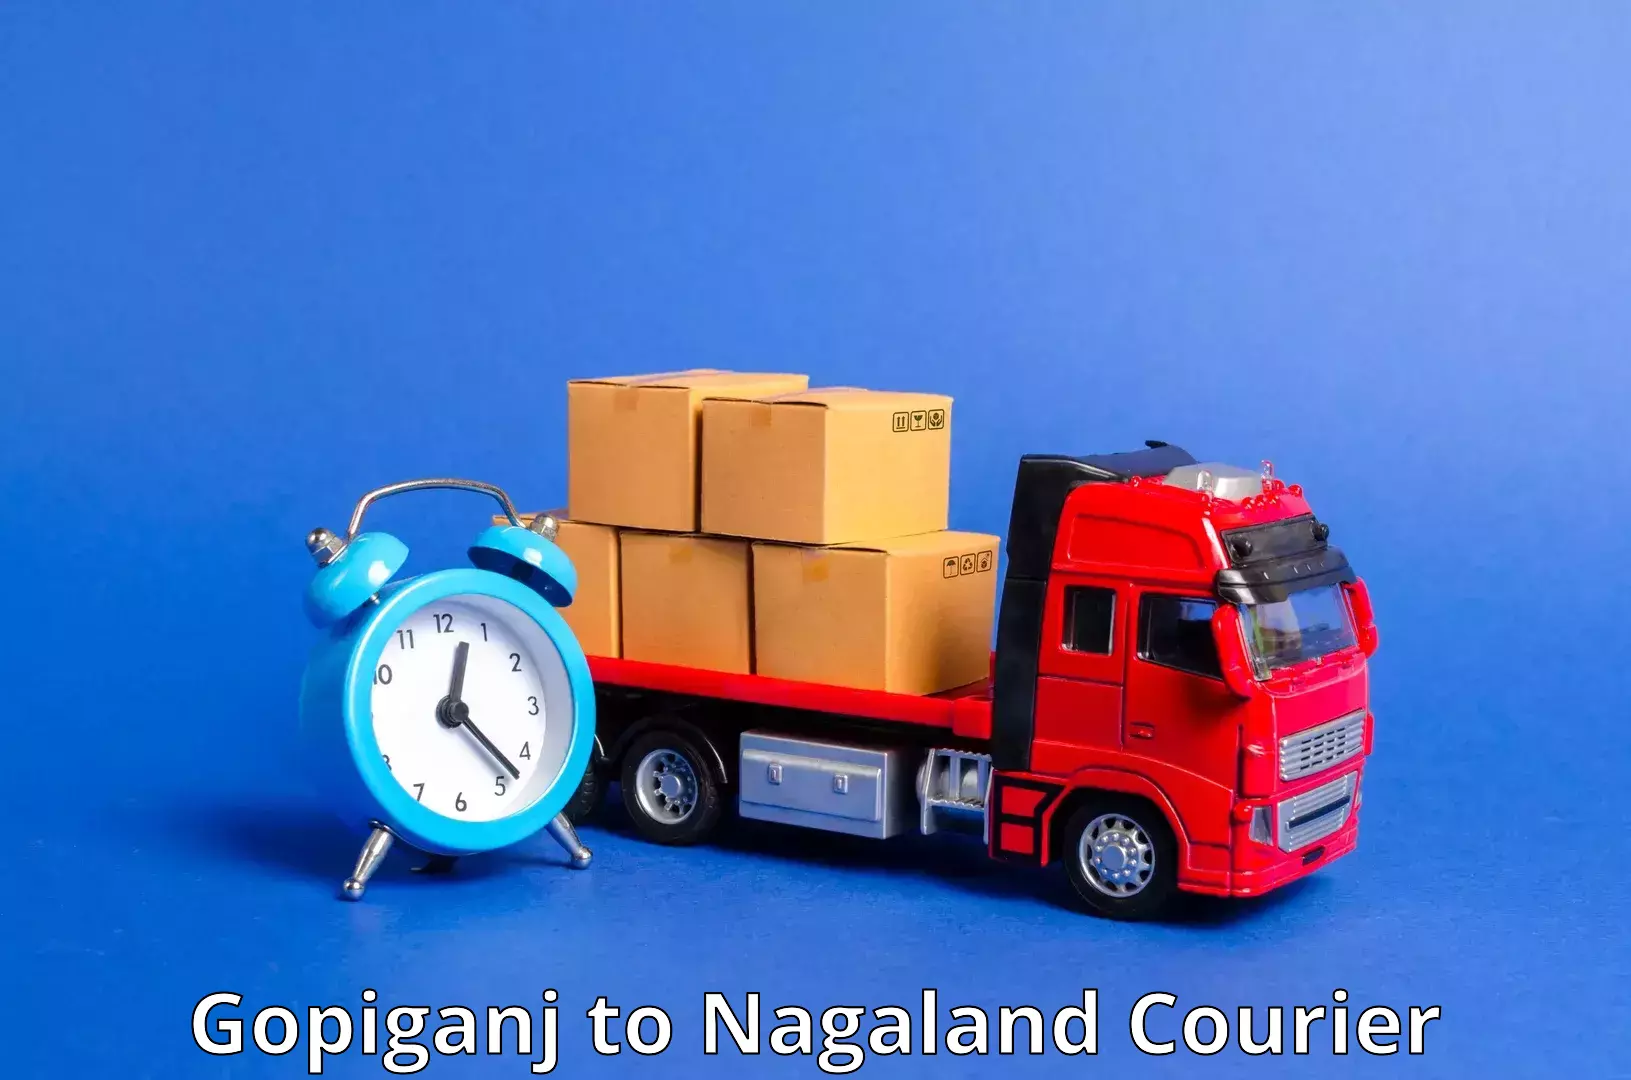 Express delivery network Gopiganj to Mon